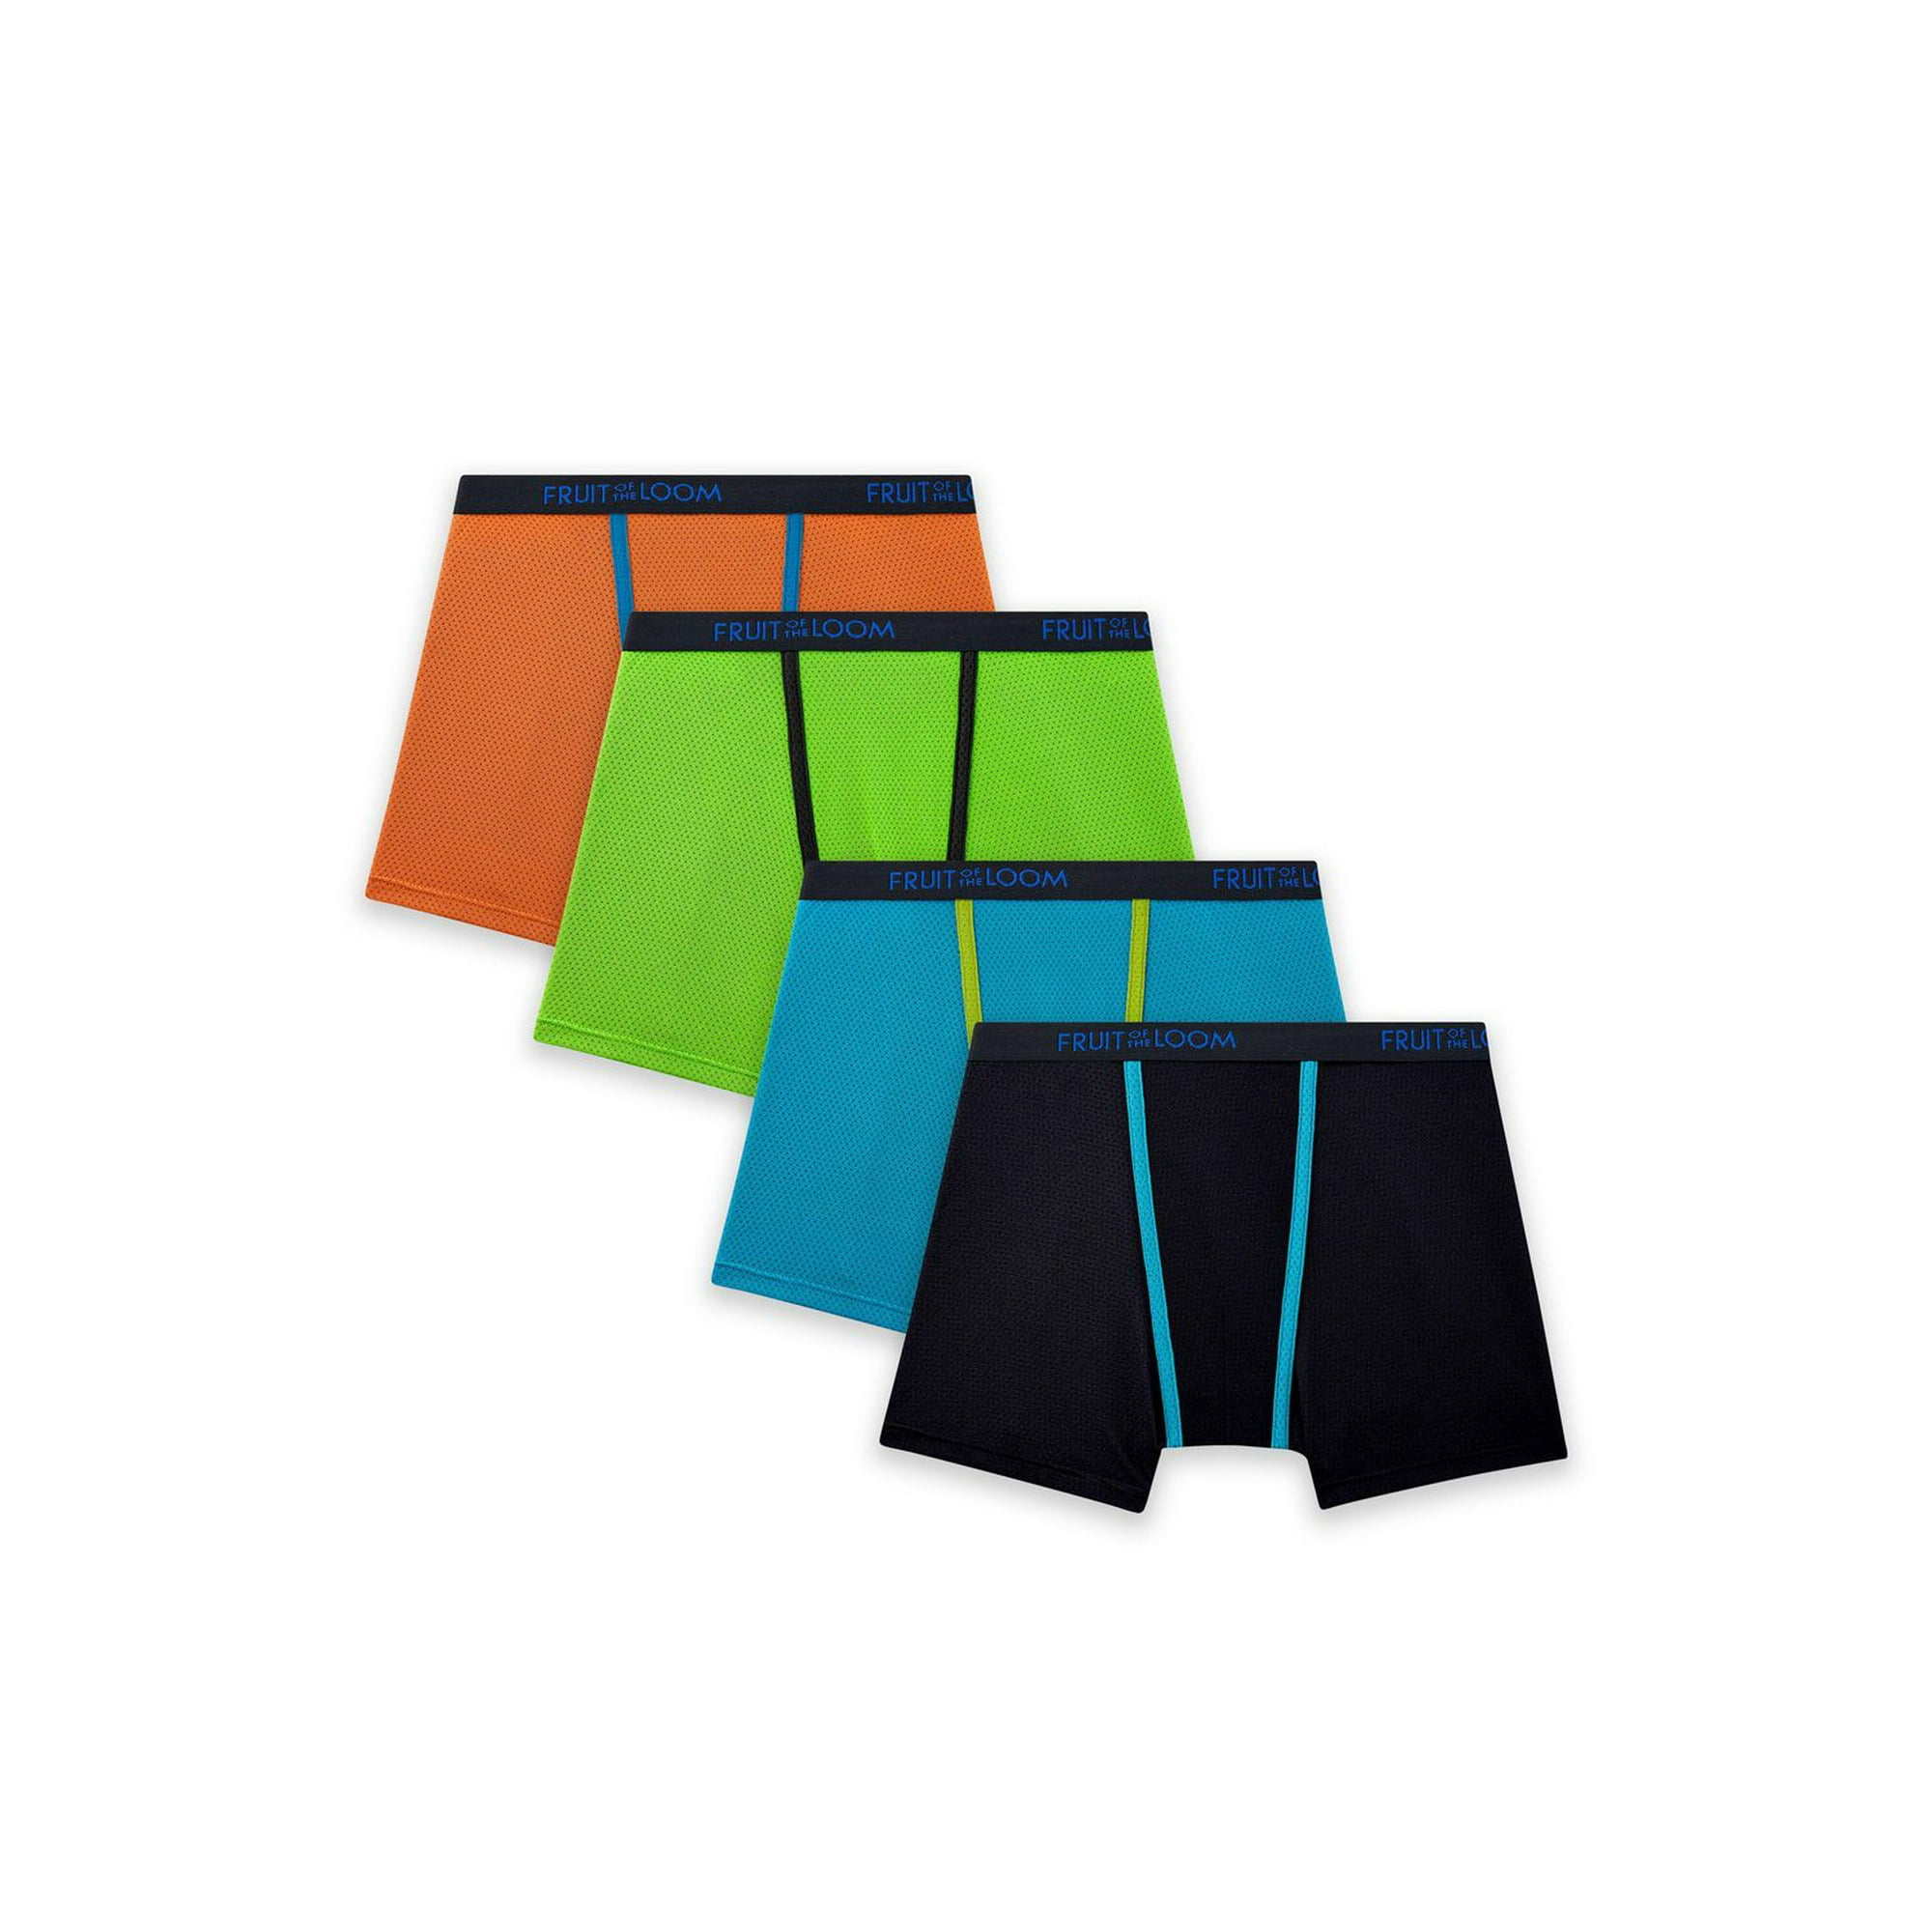 Fruit of the Loom Men's Breathable Micro-Mesh Assorted Color Briefs, 4 Pack  